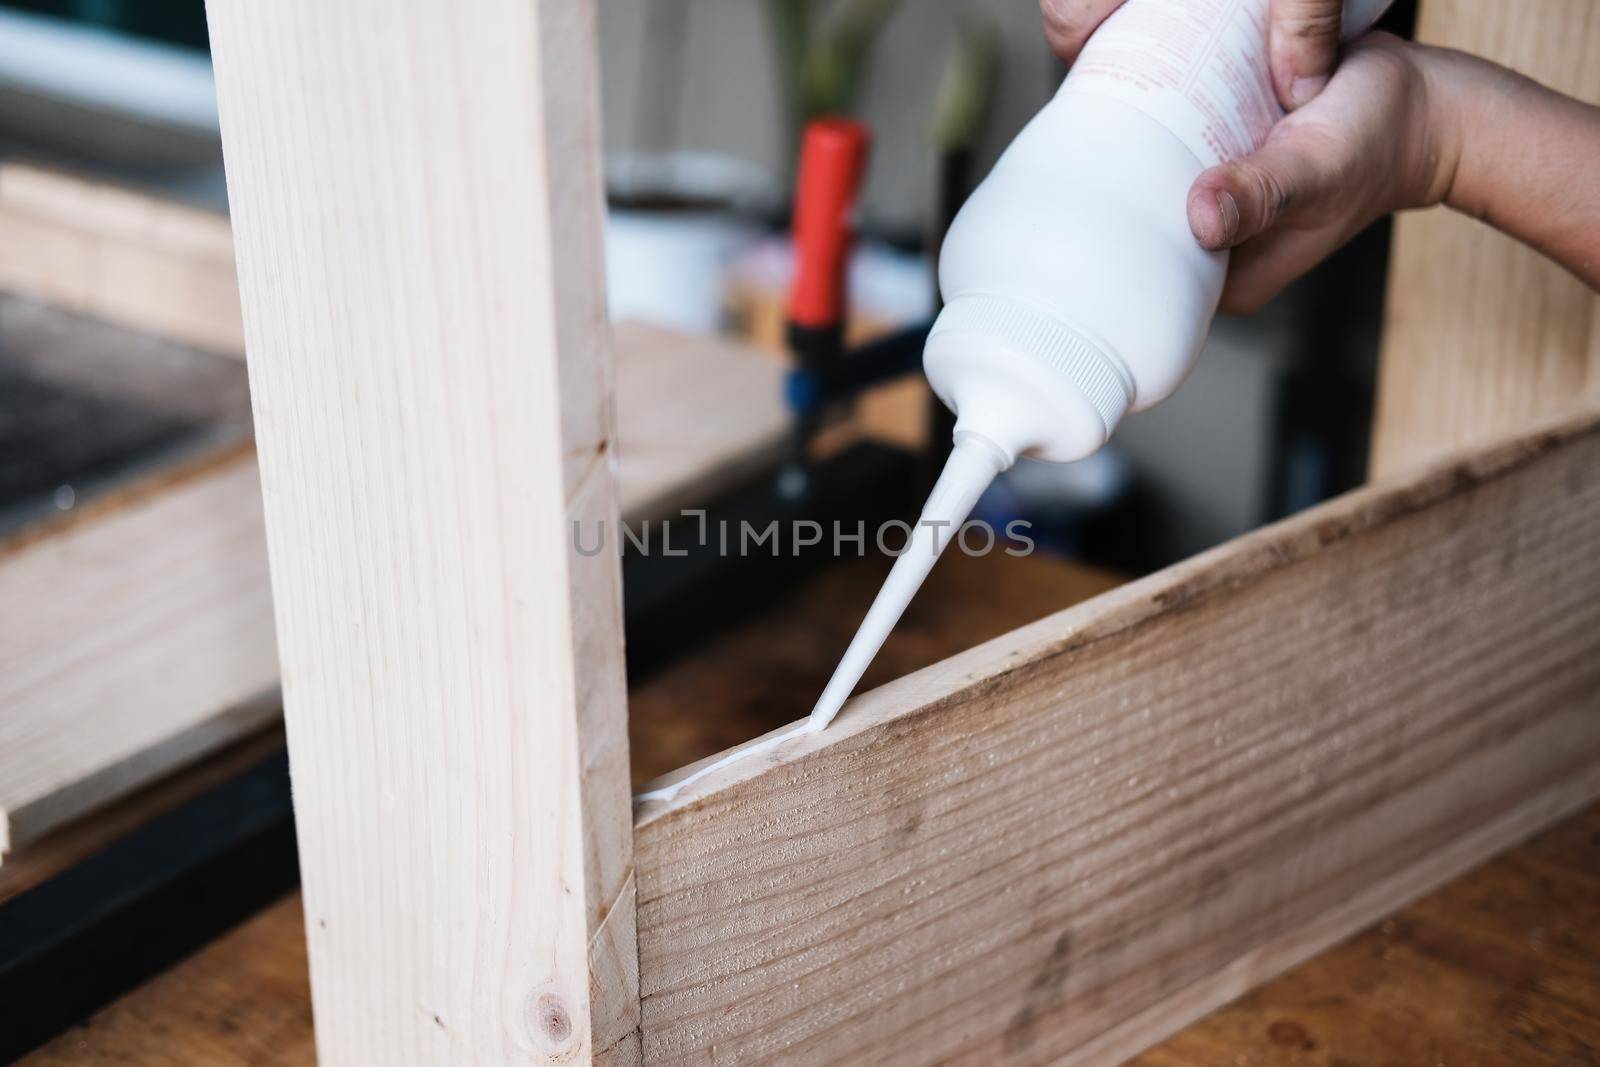 Woodworking operators are using glue to put together the wood parts to assemble and build a wooden table for their customers. by Manastrong